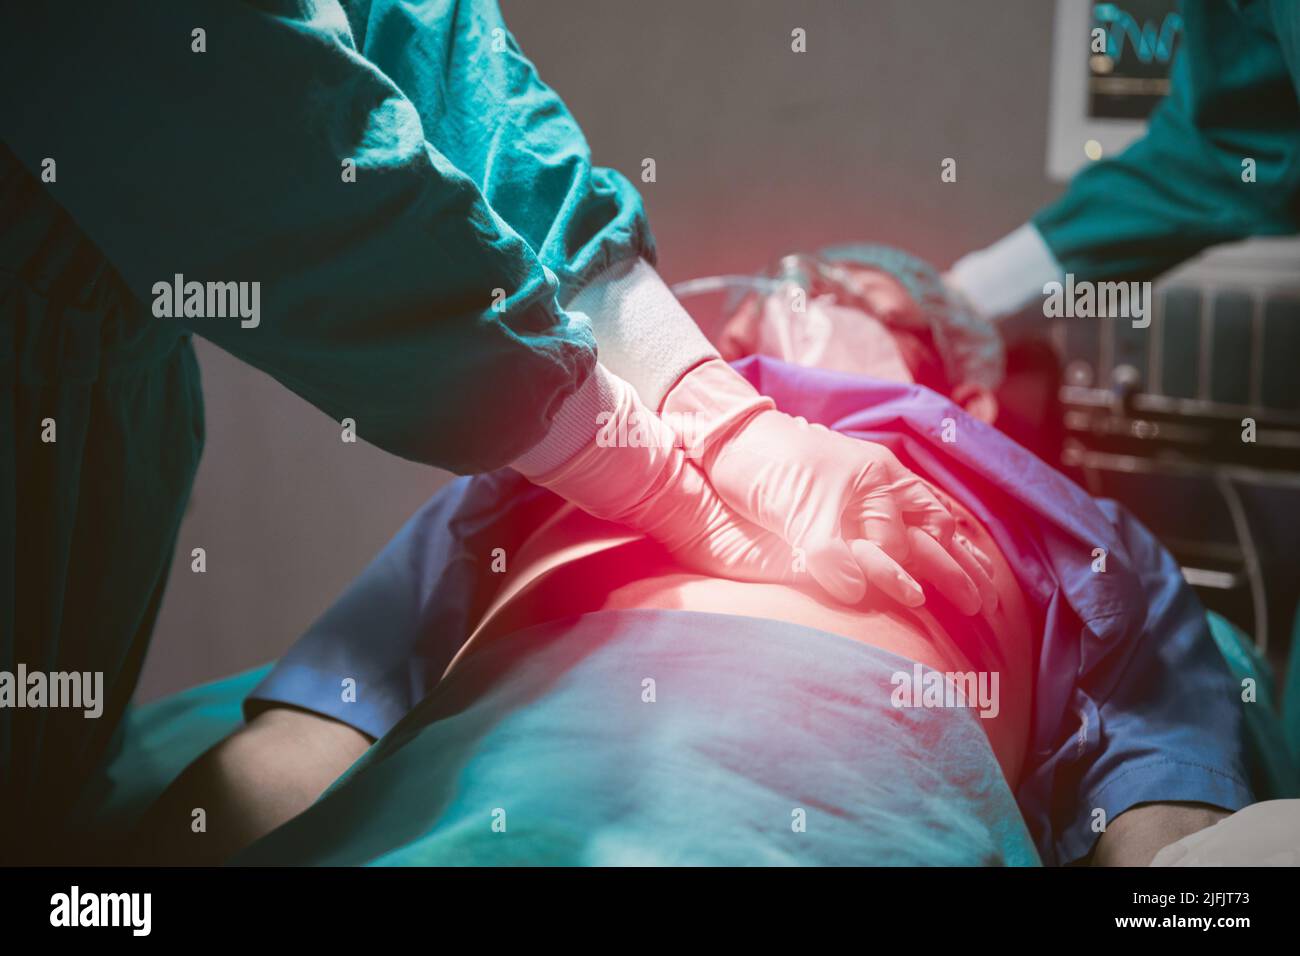 Medical team saving people life in hospital. Doctor first aid emergency CPR patient heart failure. Stock Photo